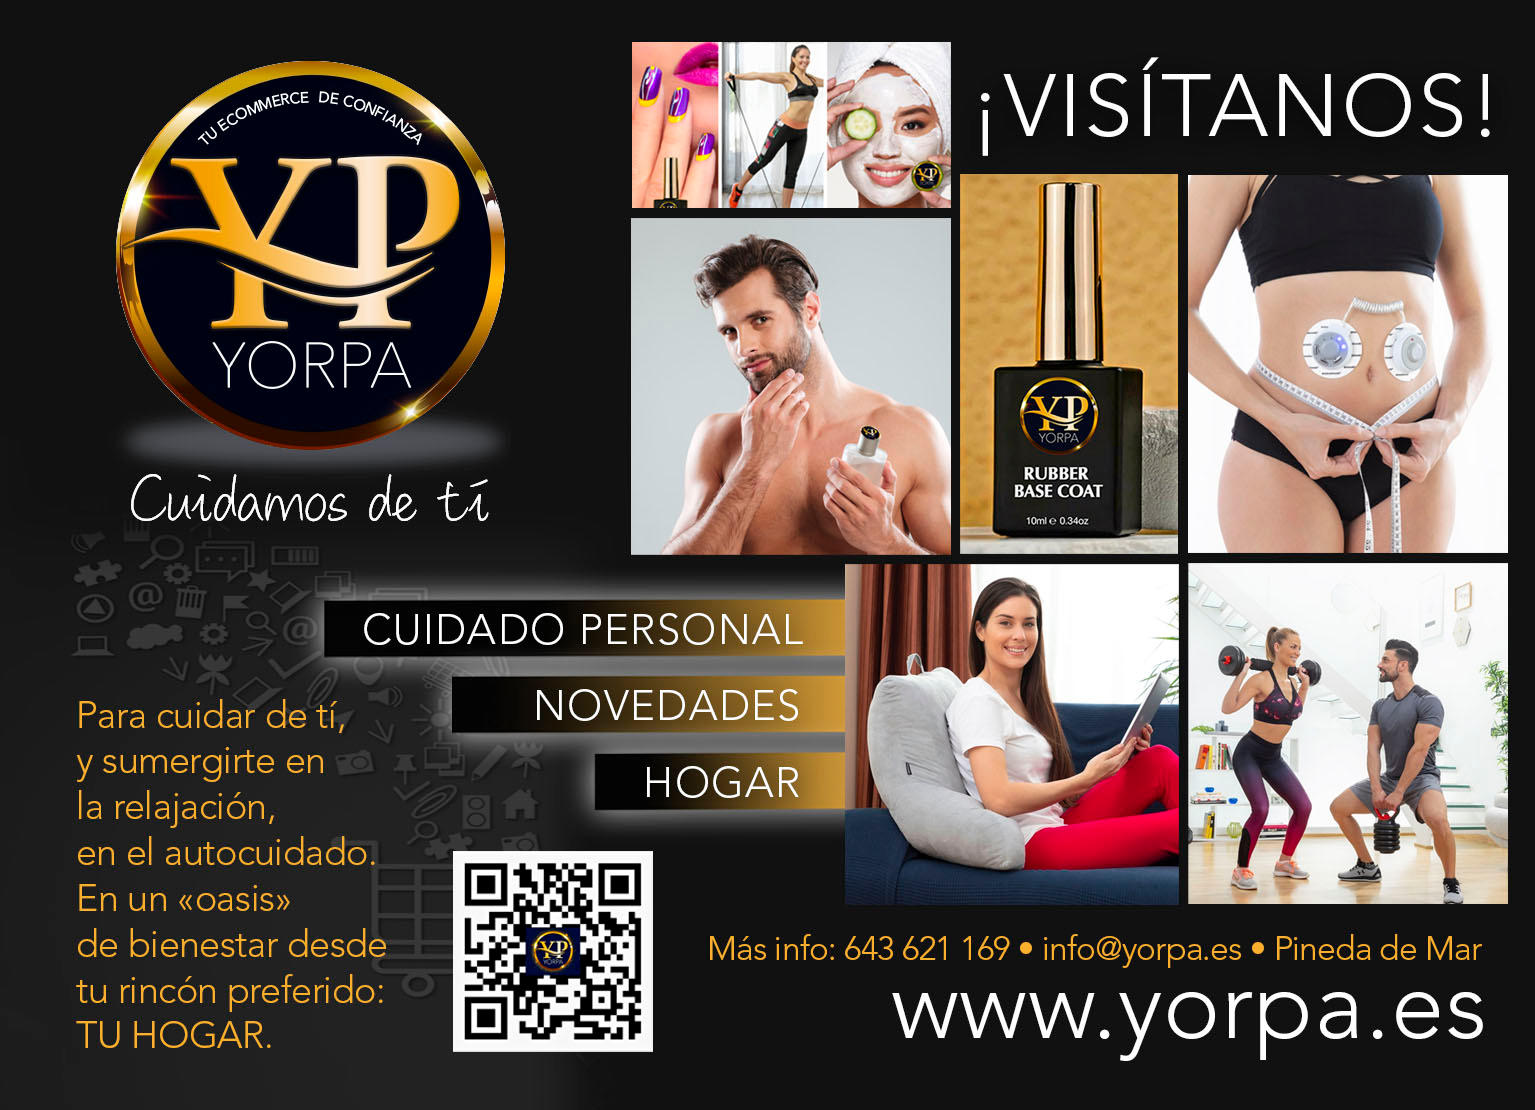 Images Yorpa